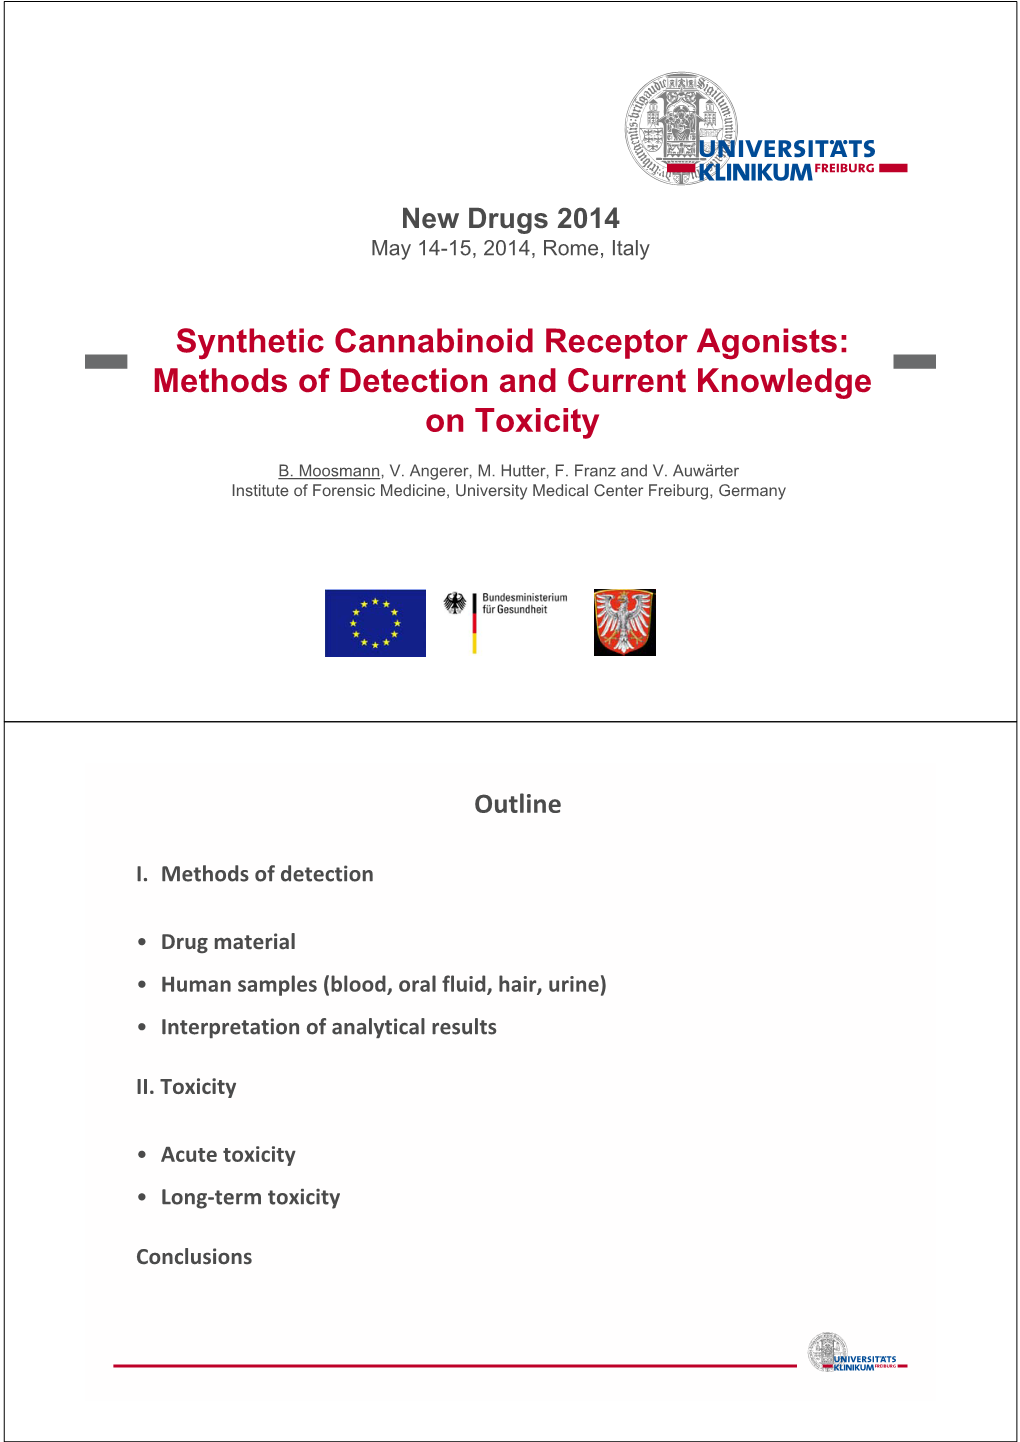 Synthetic Cannabinoid Receptor Agonists: Methods of Detection and Current Knowledge on Toxicity